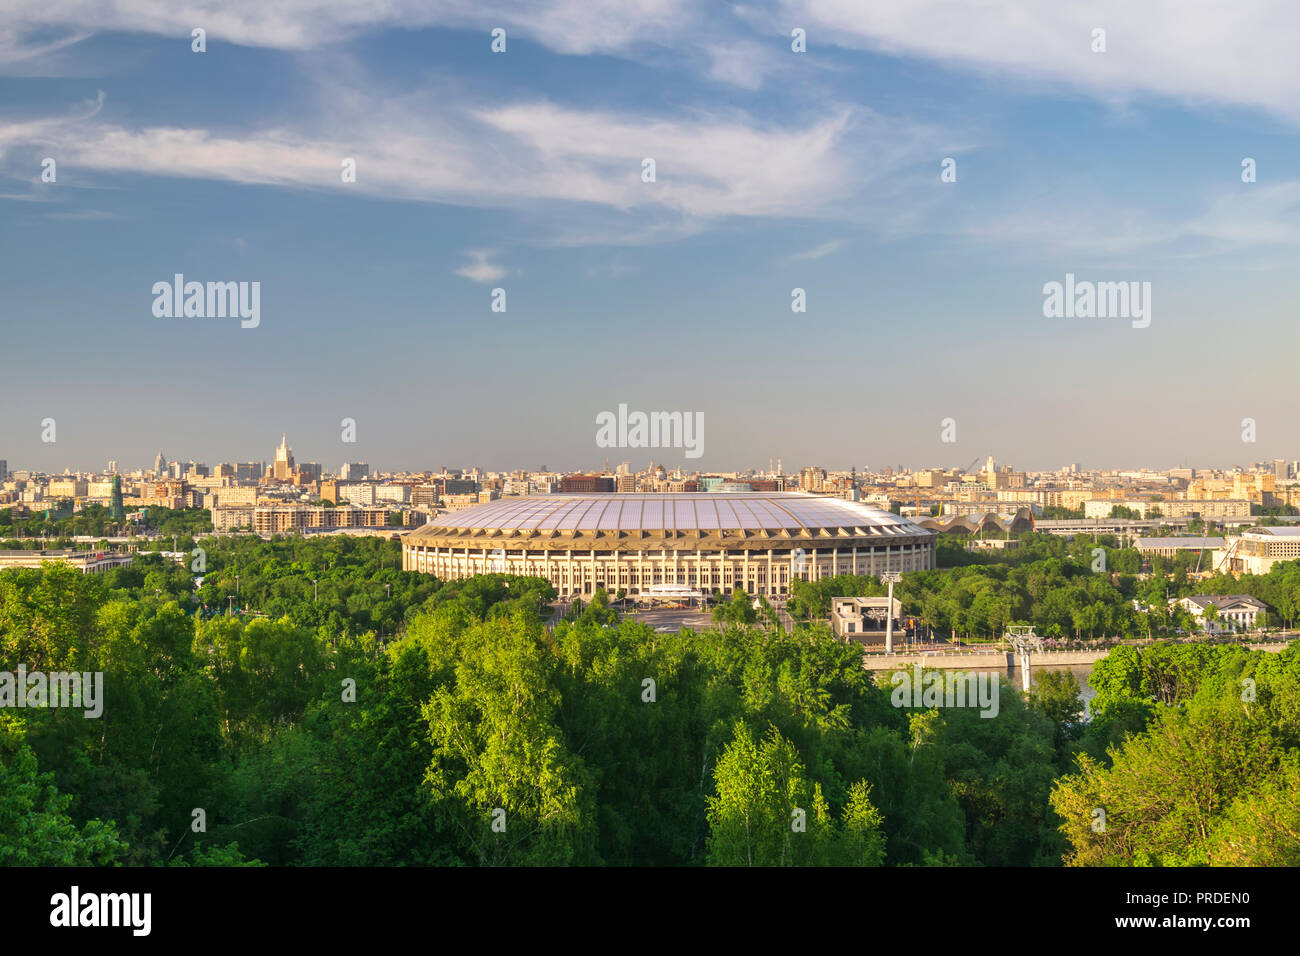 MOSCOW, RUSSIA - MAY 14, 2018: Moscow Russia, city skyline at Luzhniki Stadium view from Sparrow Hill Stock Photo